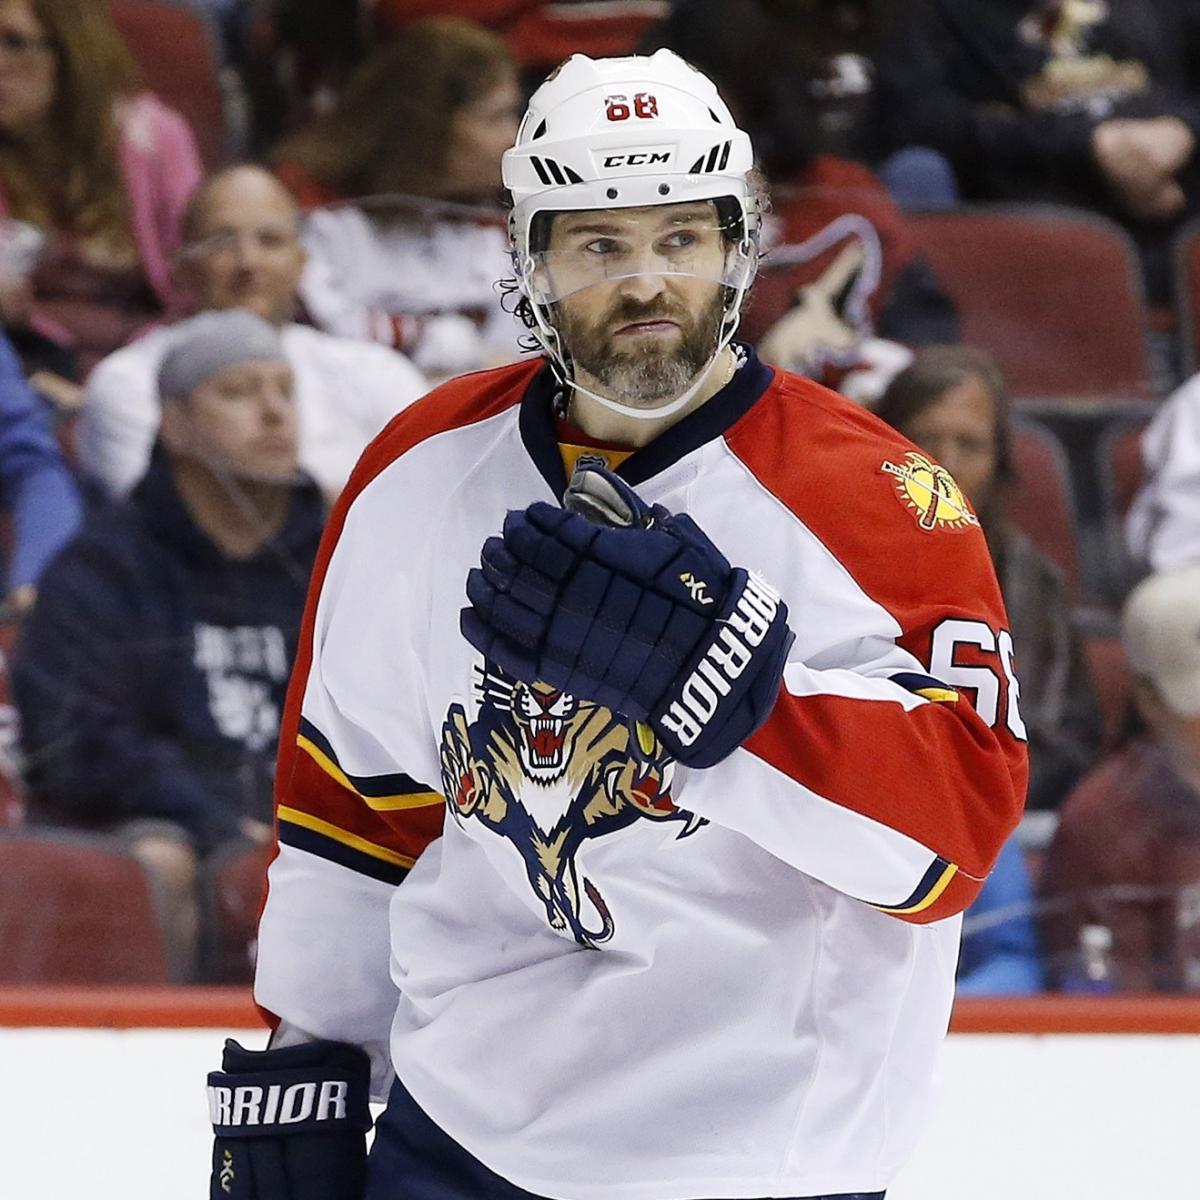 Jaromir Jagr has been placed on waivers: reports - NBC Sports